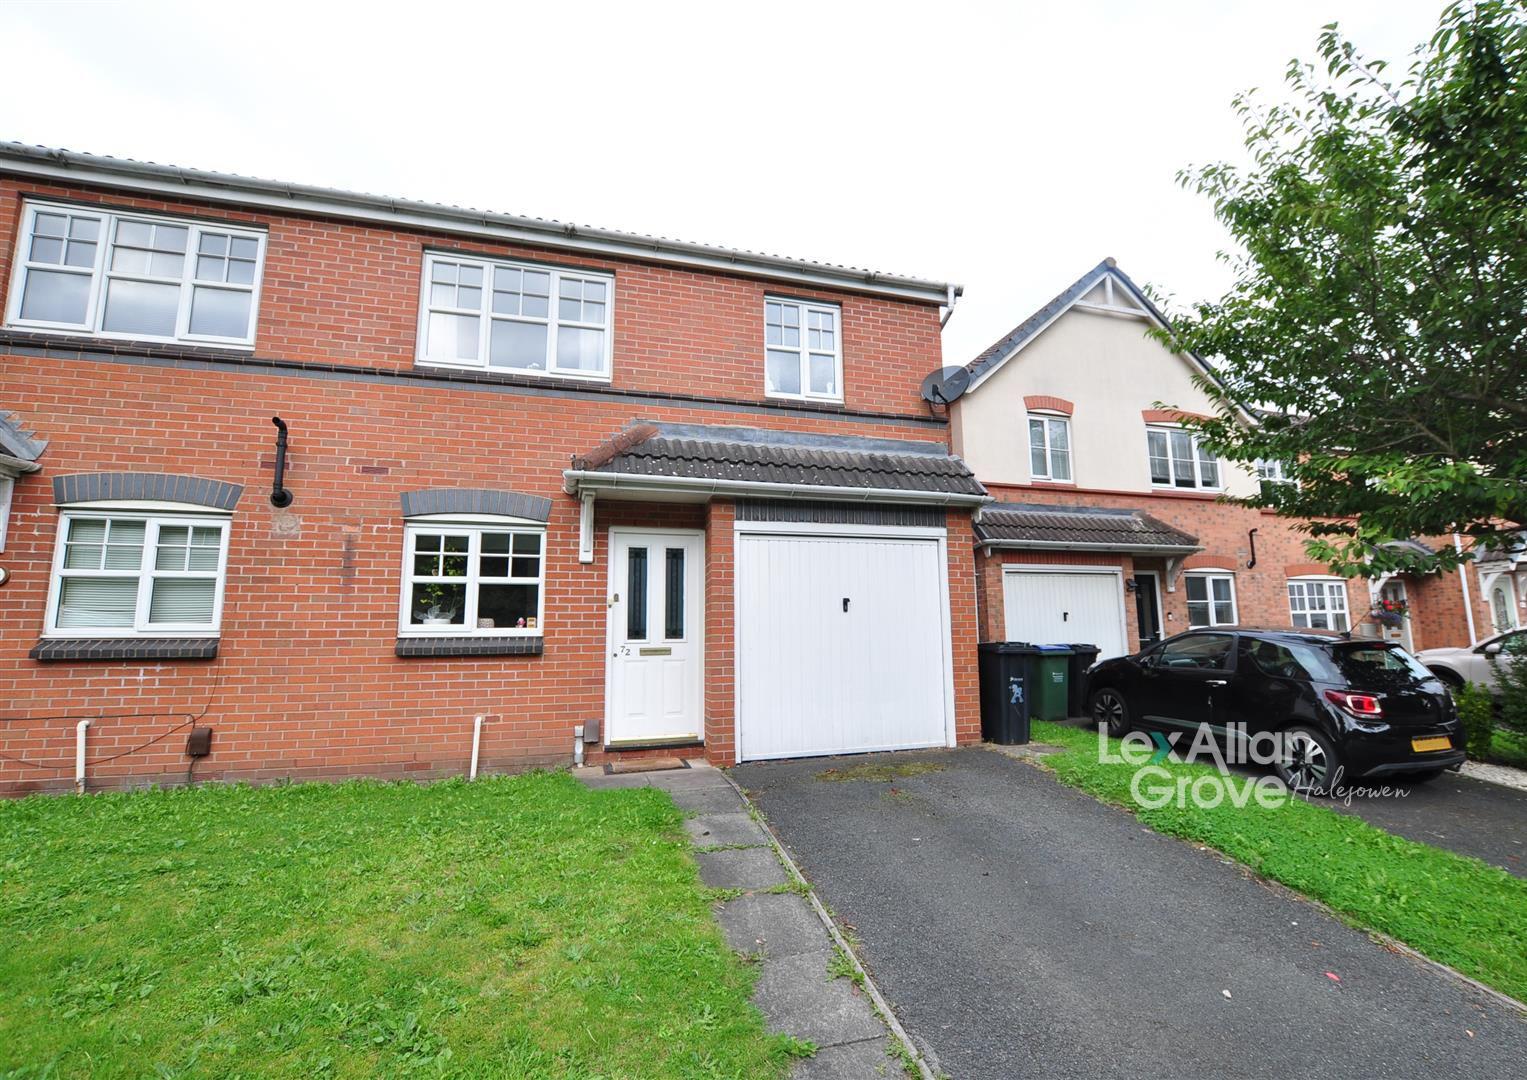 3 bed semi-detached house for sale in Wrights Lane, Cradley Heath - Property Image 1